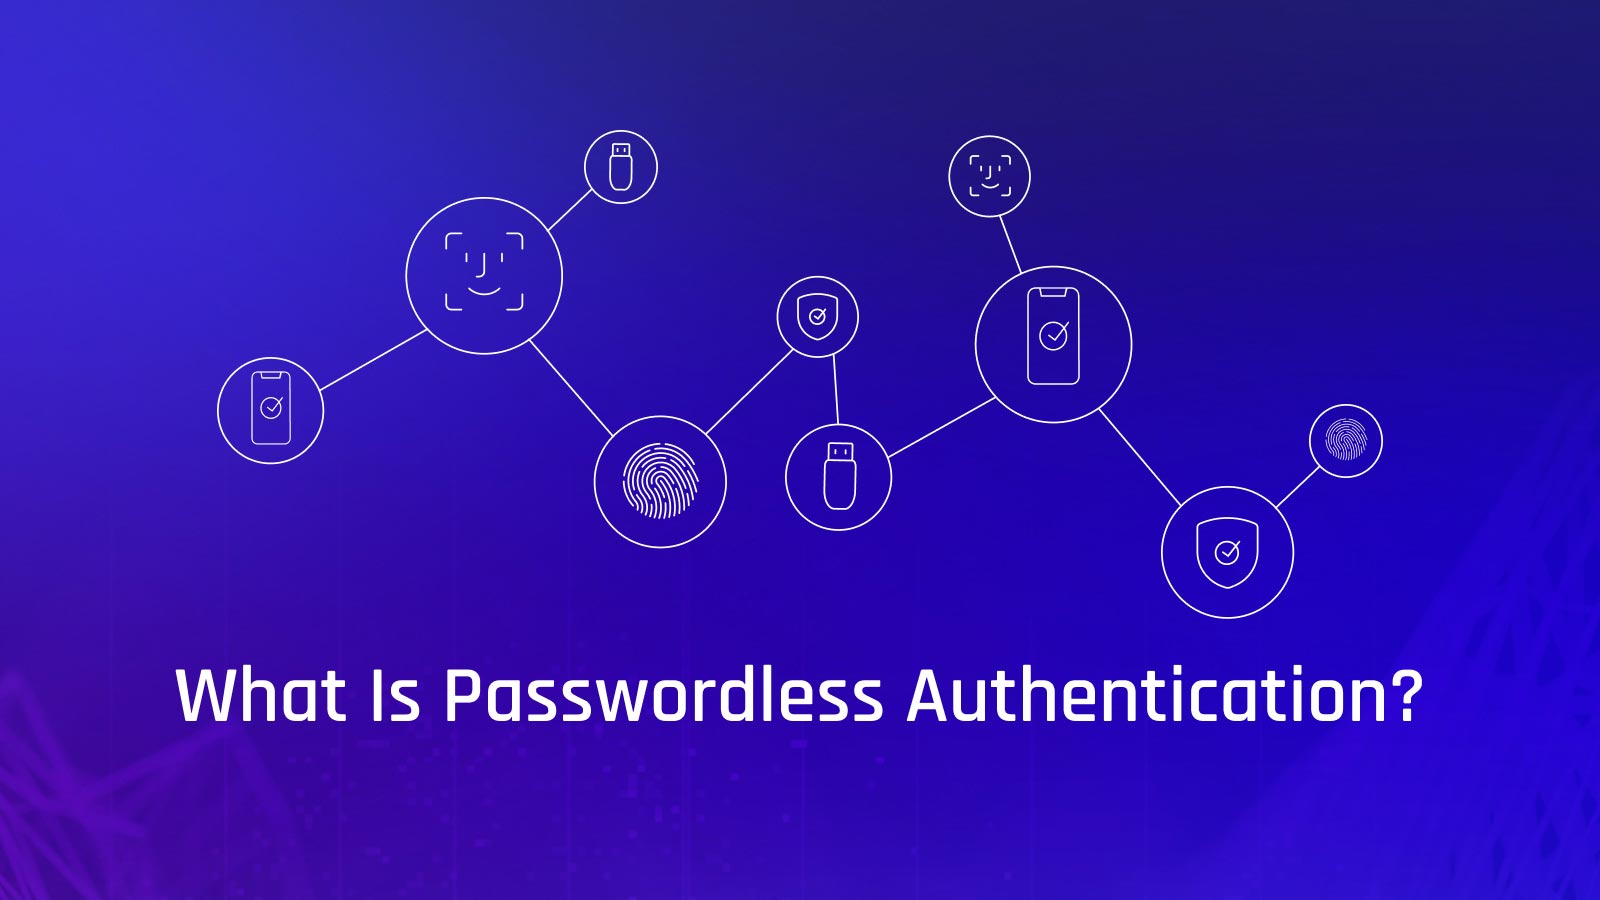 What is Passwordless Authentication?